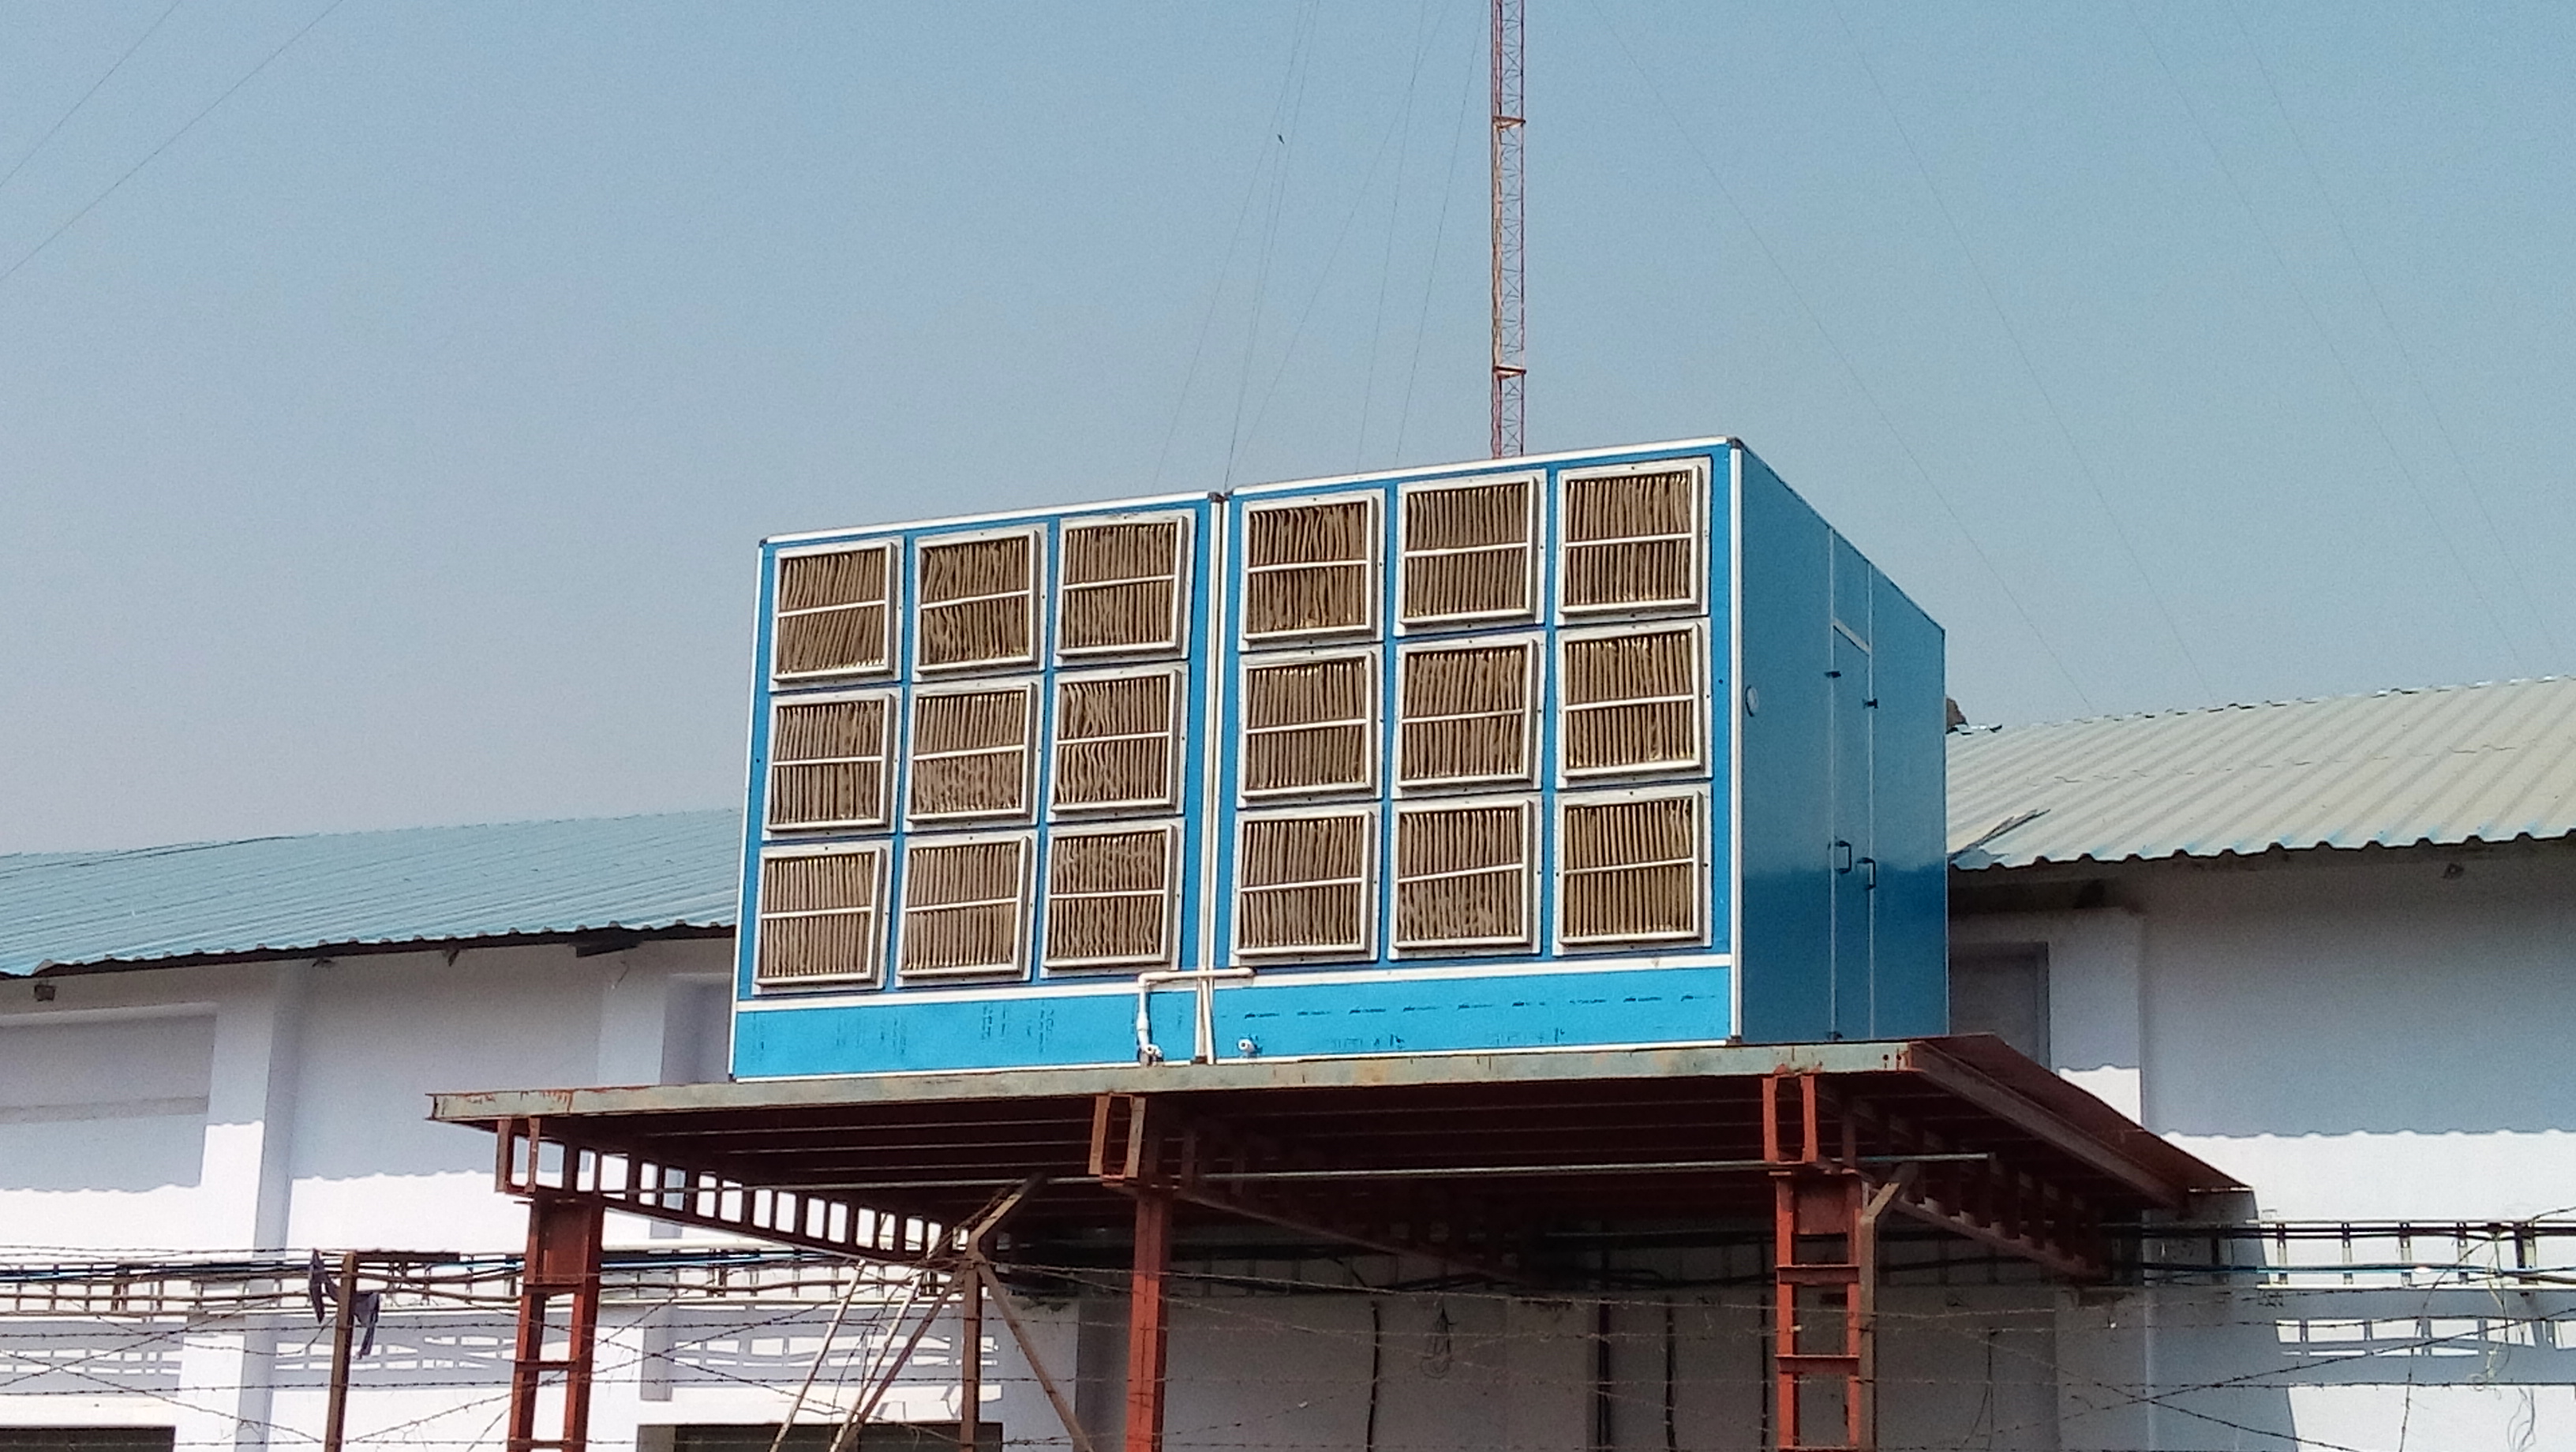 Industrial Air Washer System Manufacturer, Supplier, Exporter from Ahmedabad, Gujarat, India